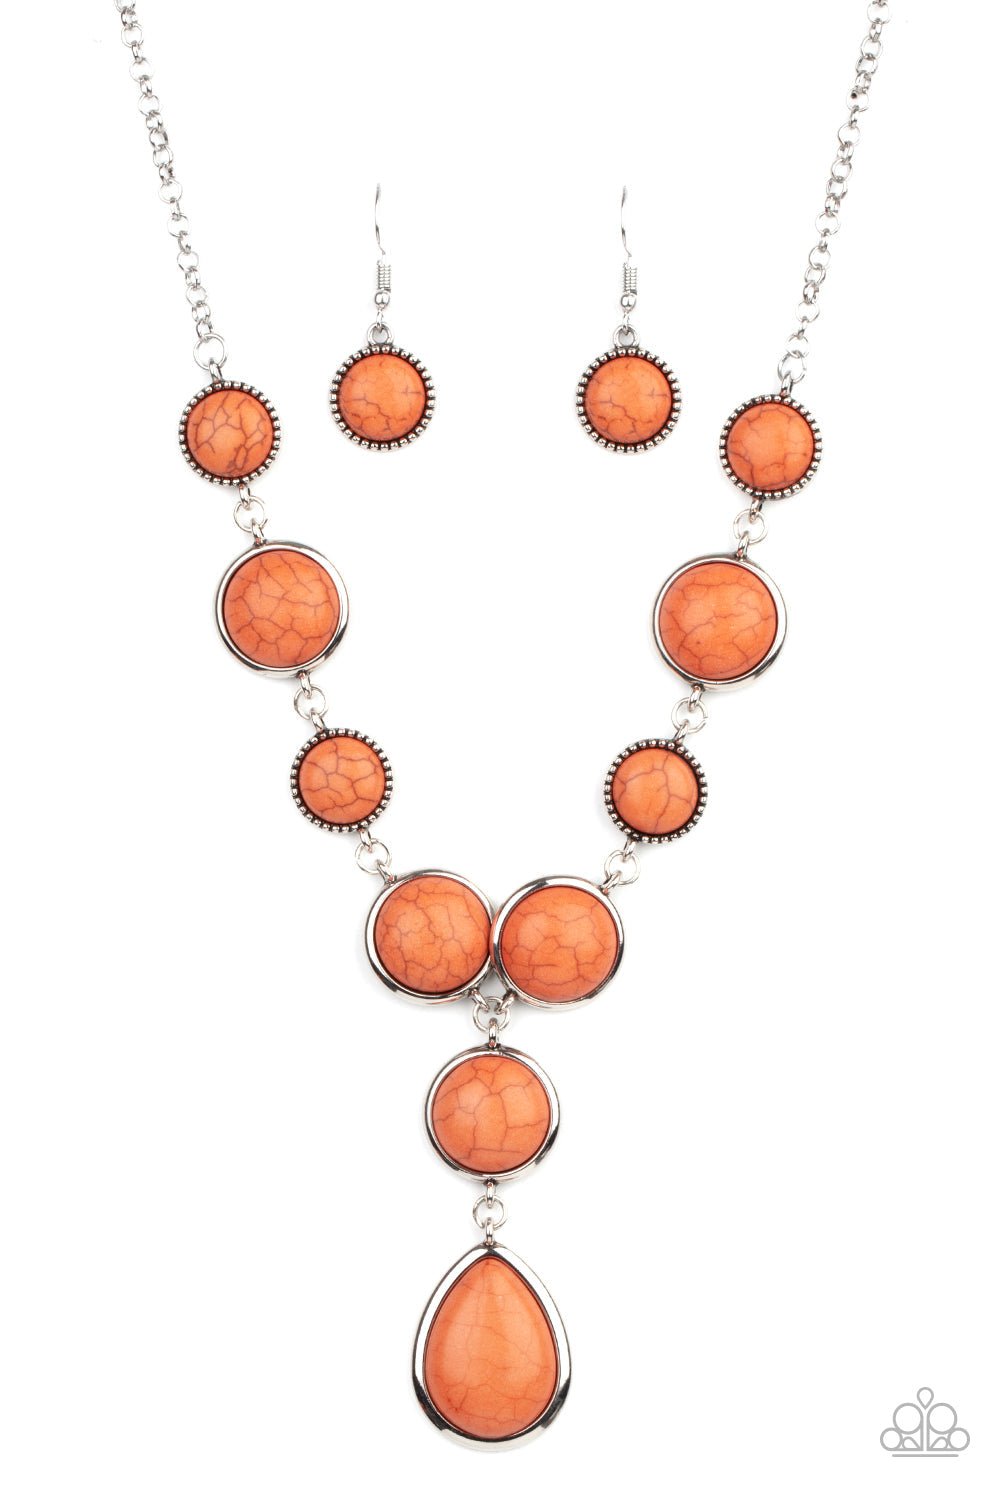 Terrestrial Trailblazer - Orange Stone - Silver Necklace - Paparazzi Accessories - Orange stones alternate below the collar. A refreshing orange stone teardrop swings from the bottom, for an earthy extended pendant. Features an adjustable clasp closure.